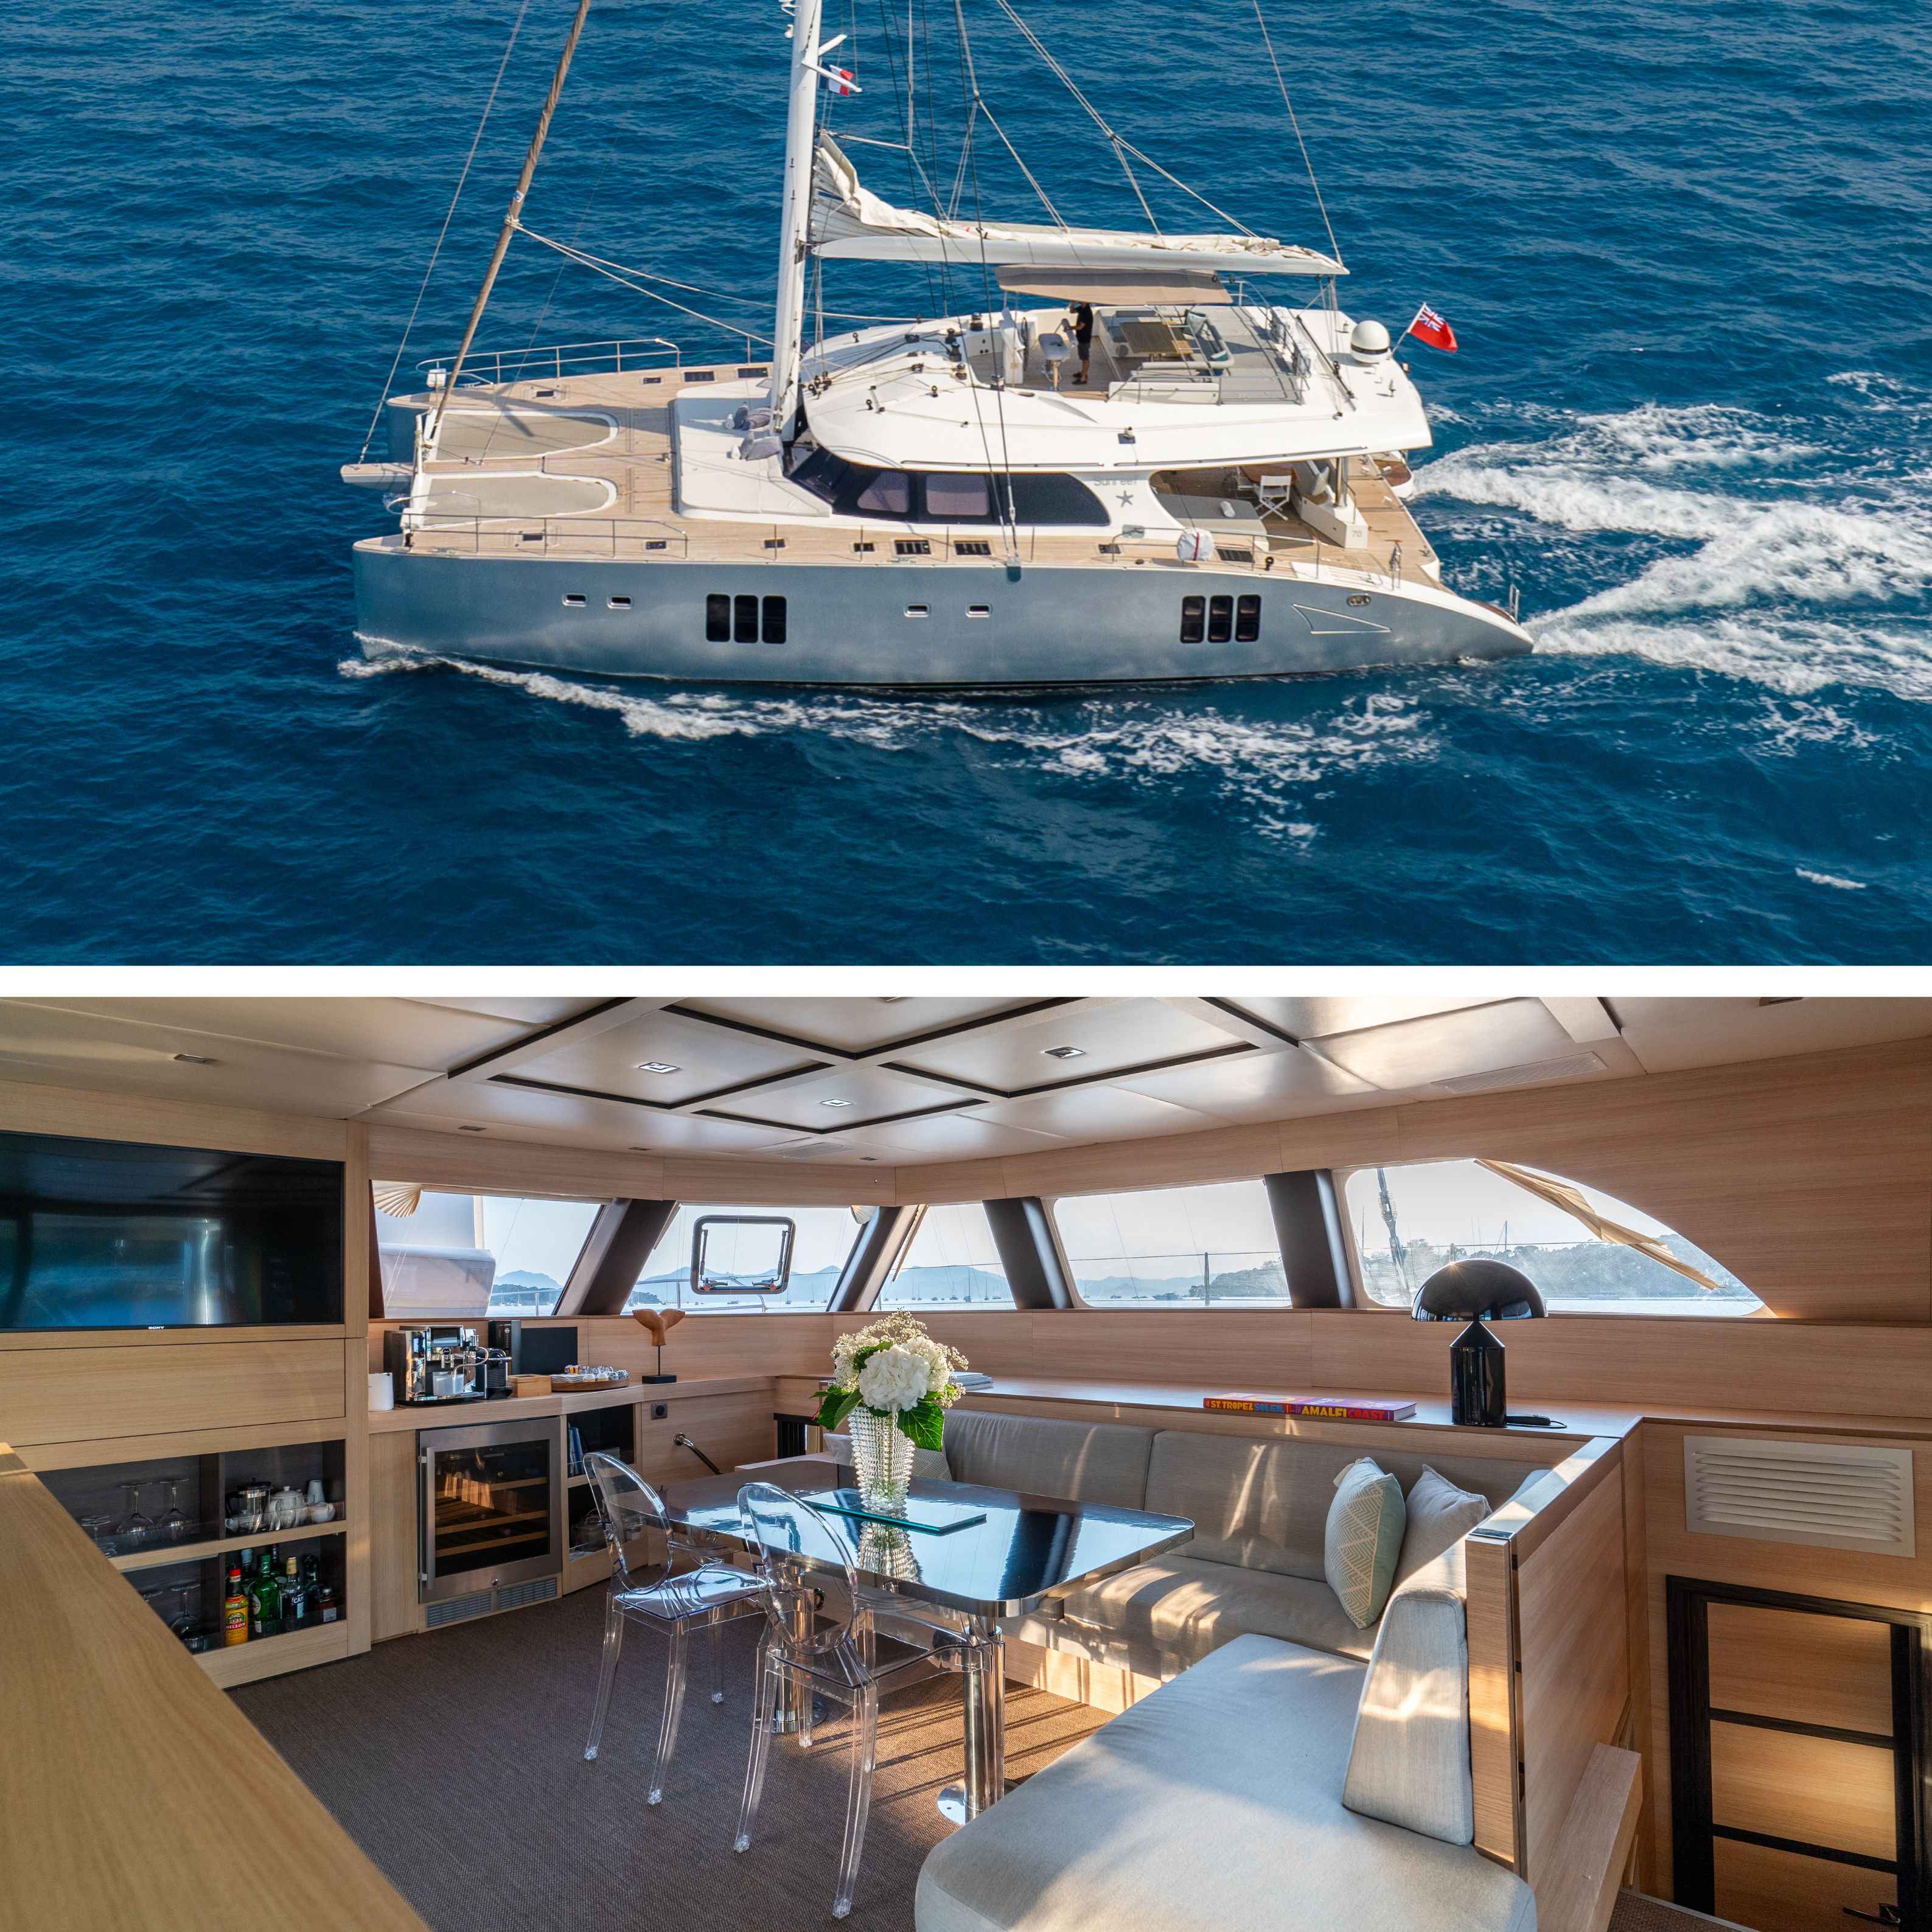 S/Cat SEAZEN II: Available to Visit in Dubai from 1st to 5th March, Book Your Place Now! | BGYB